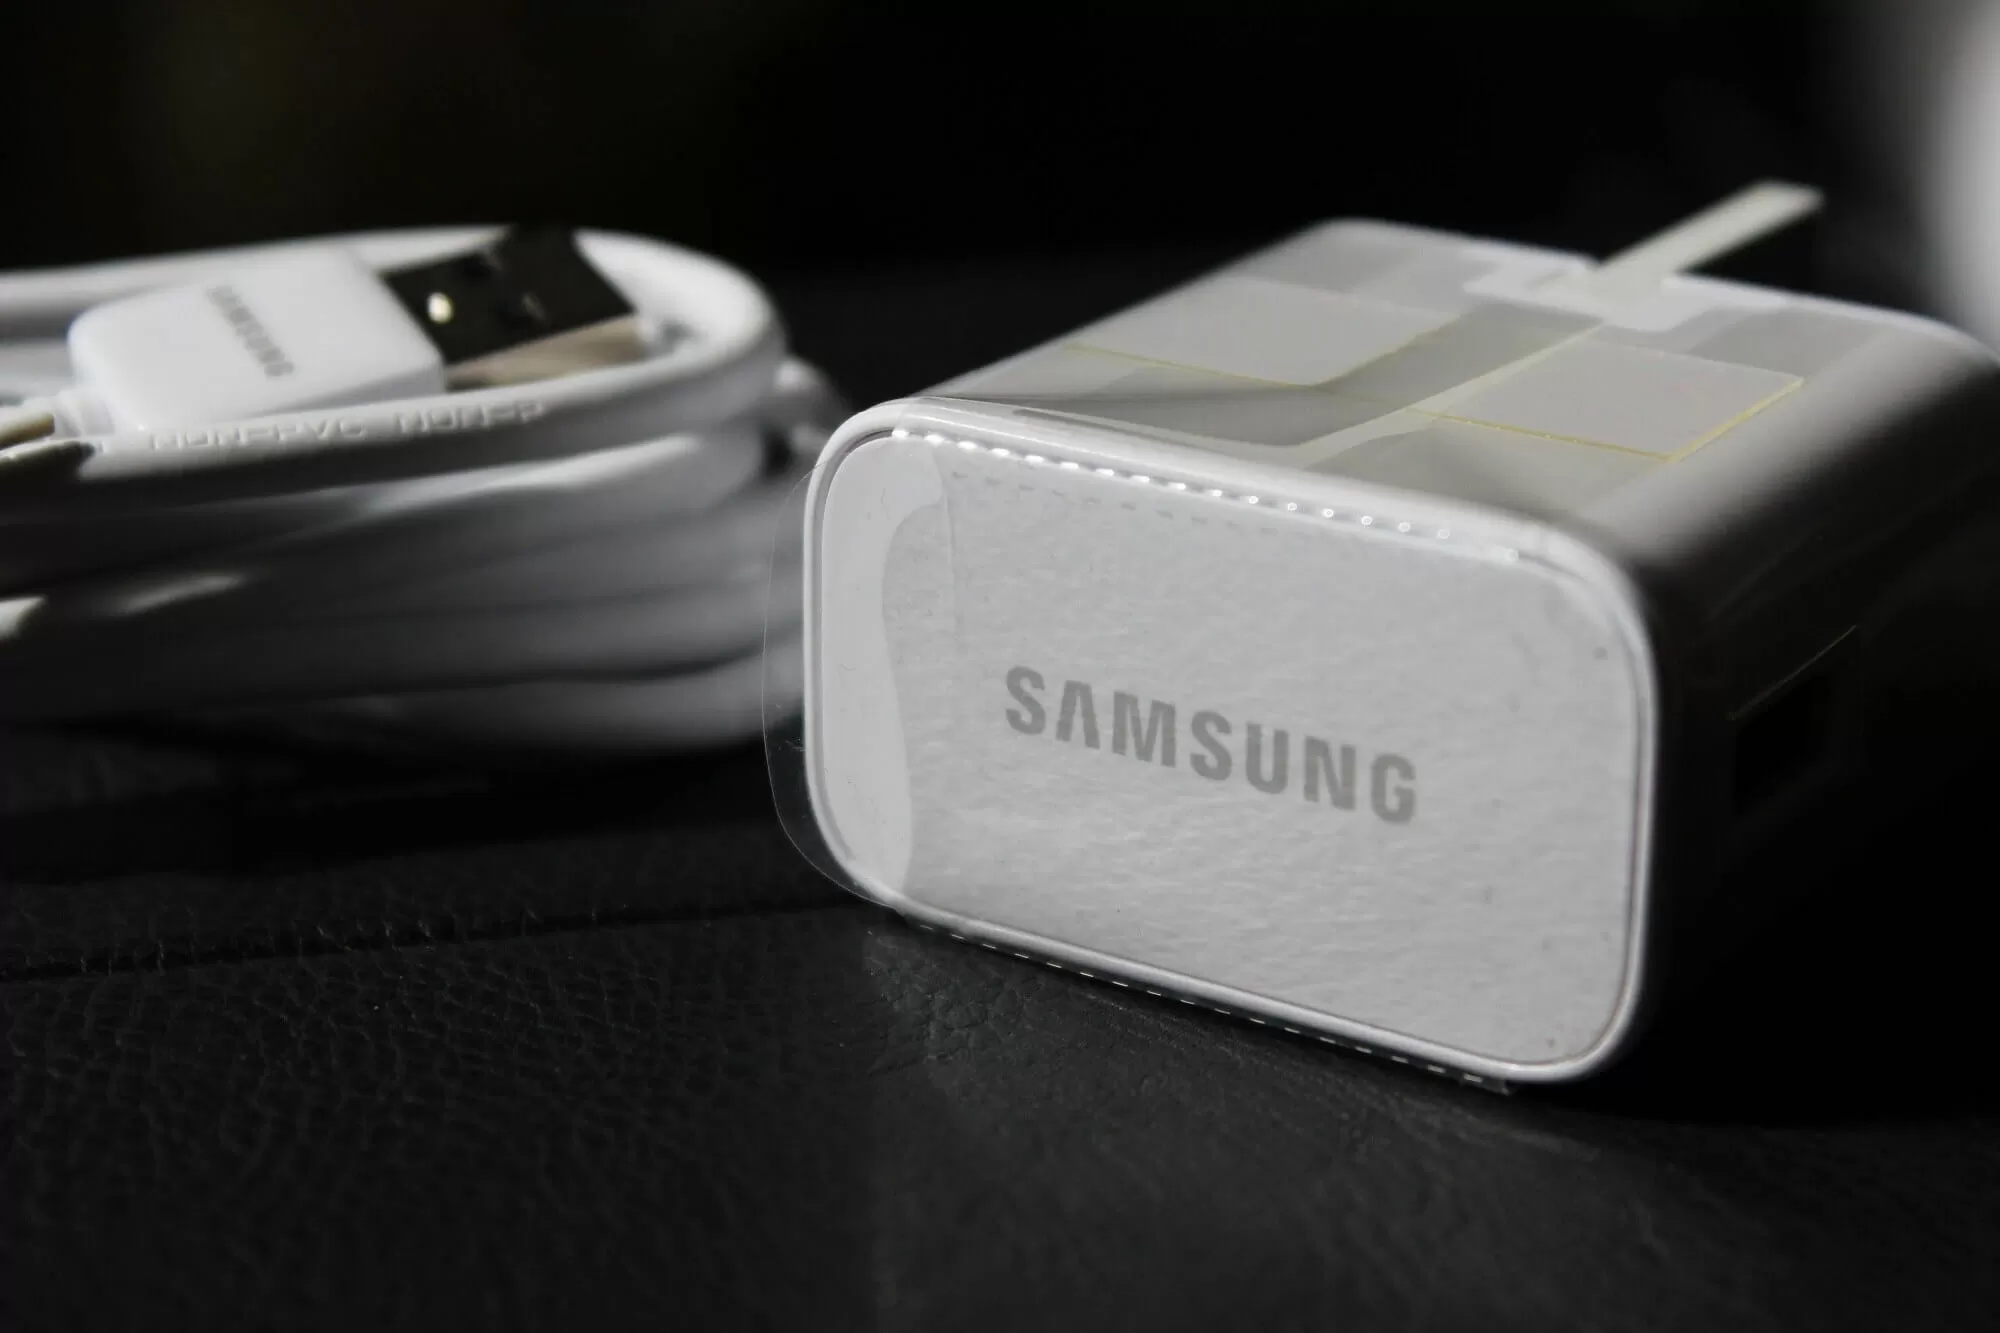 Samsung may follow Apple and drop in-box chargers